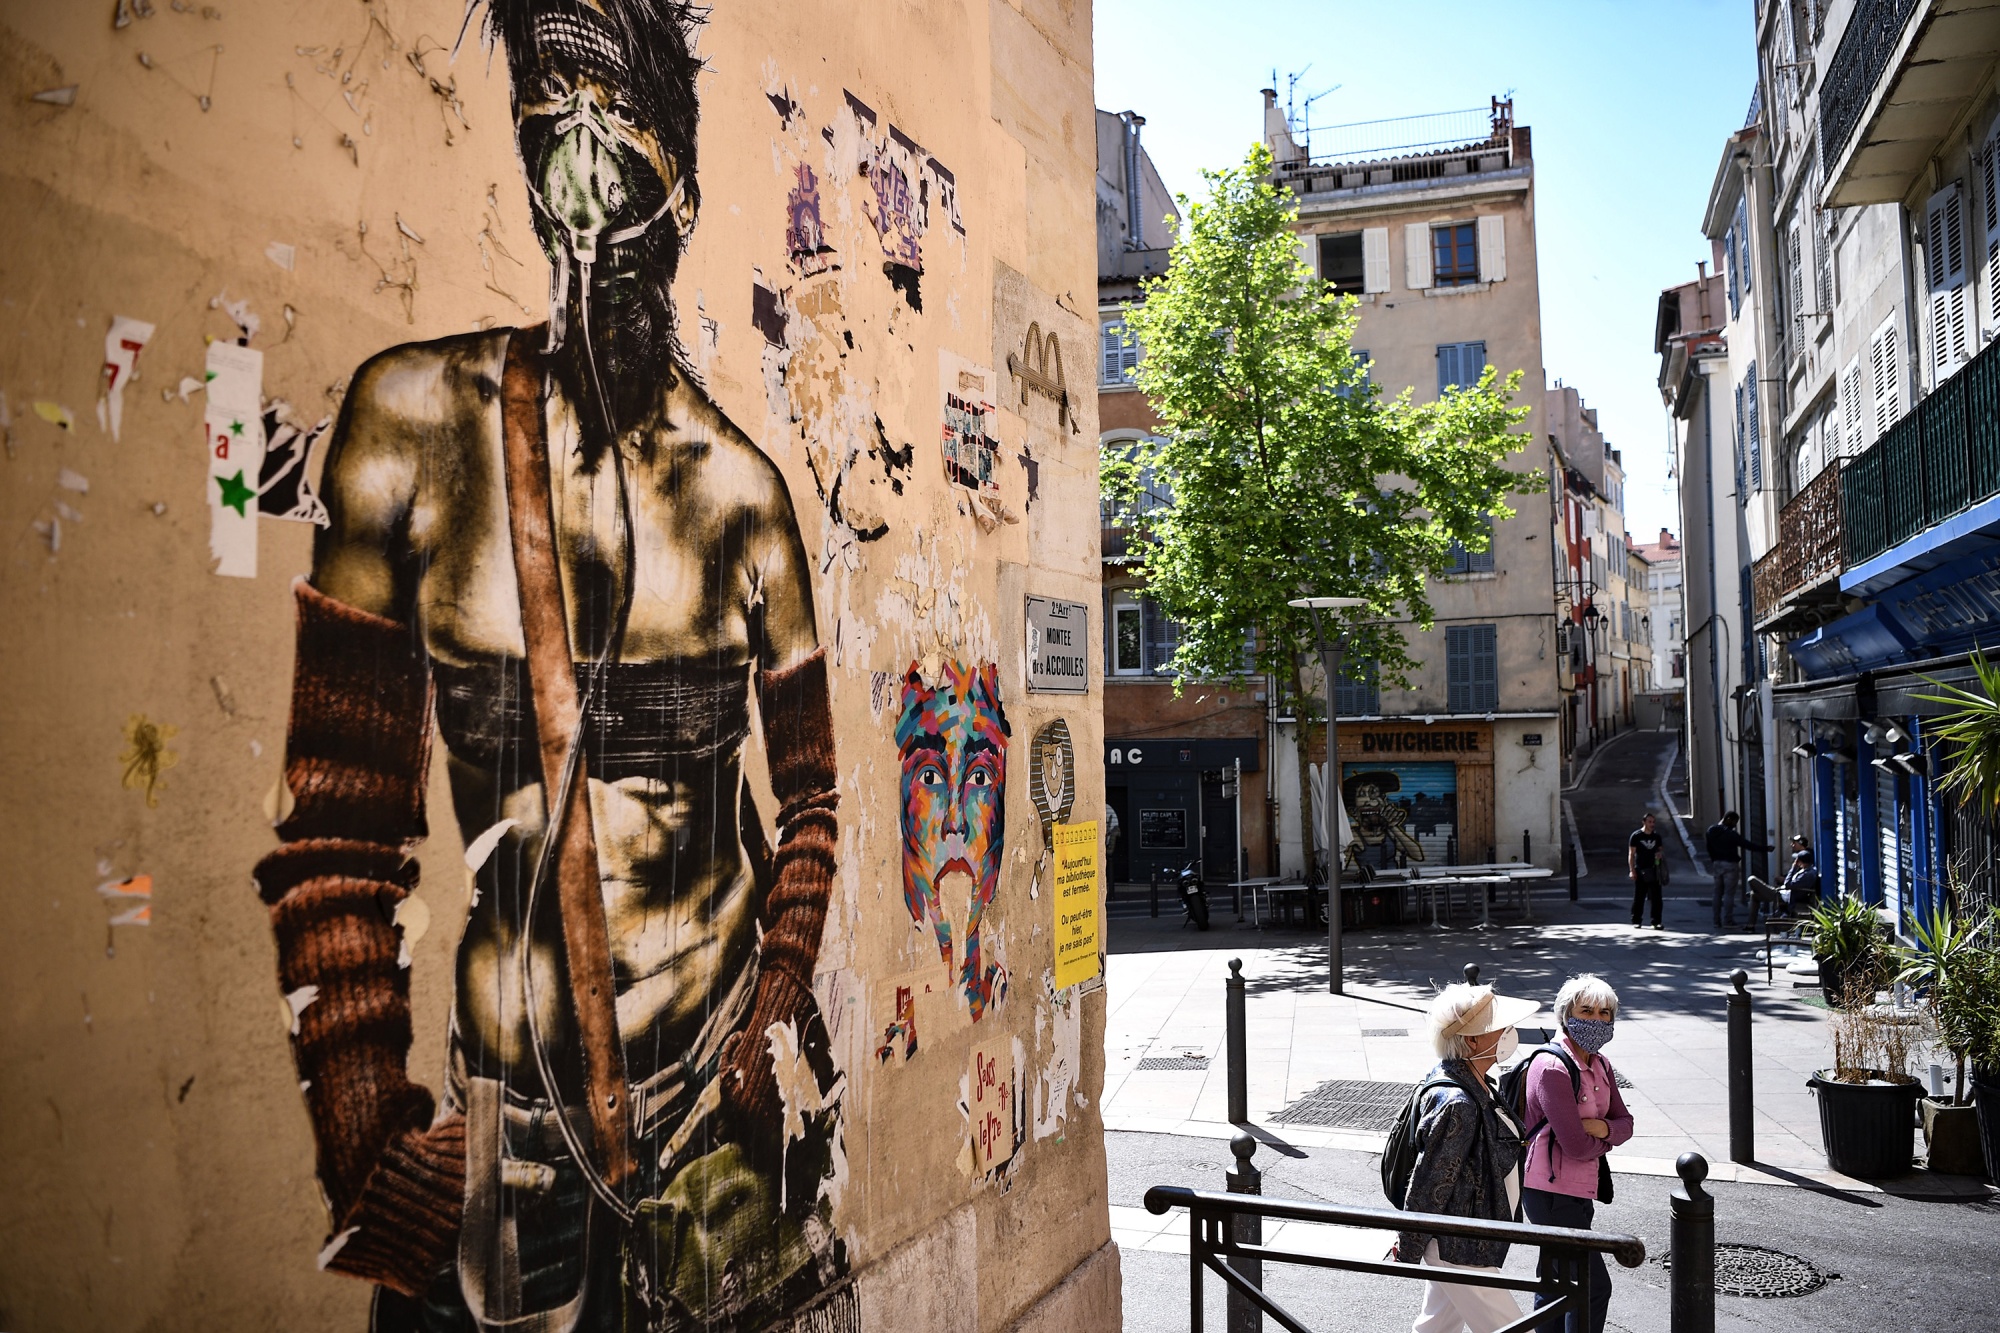 Women walk past a mural in Marseille, France, on April 25. The Green Party has taken power in the southern port city as part of a coalition.